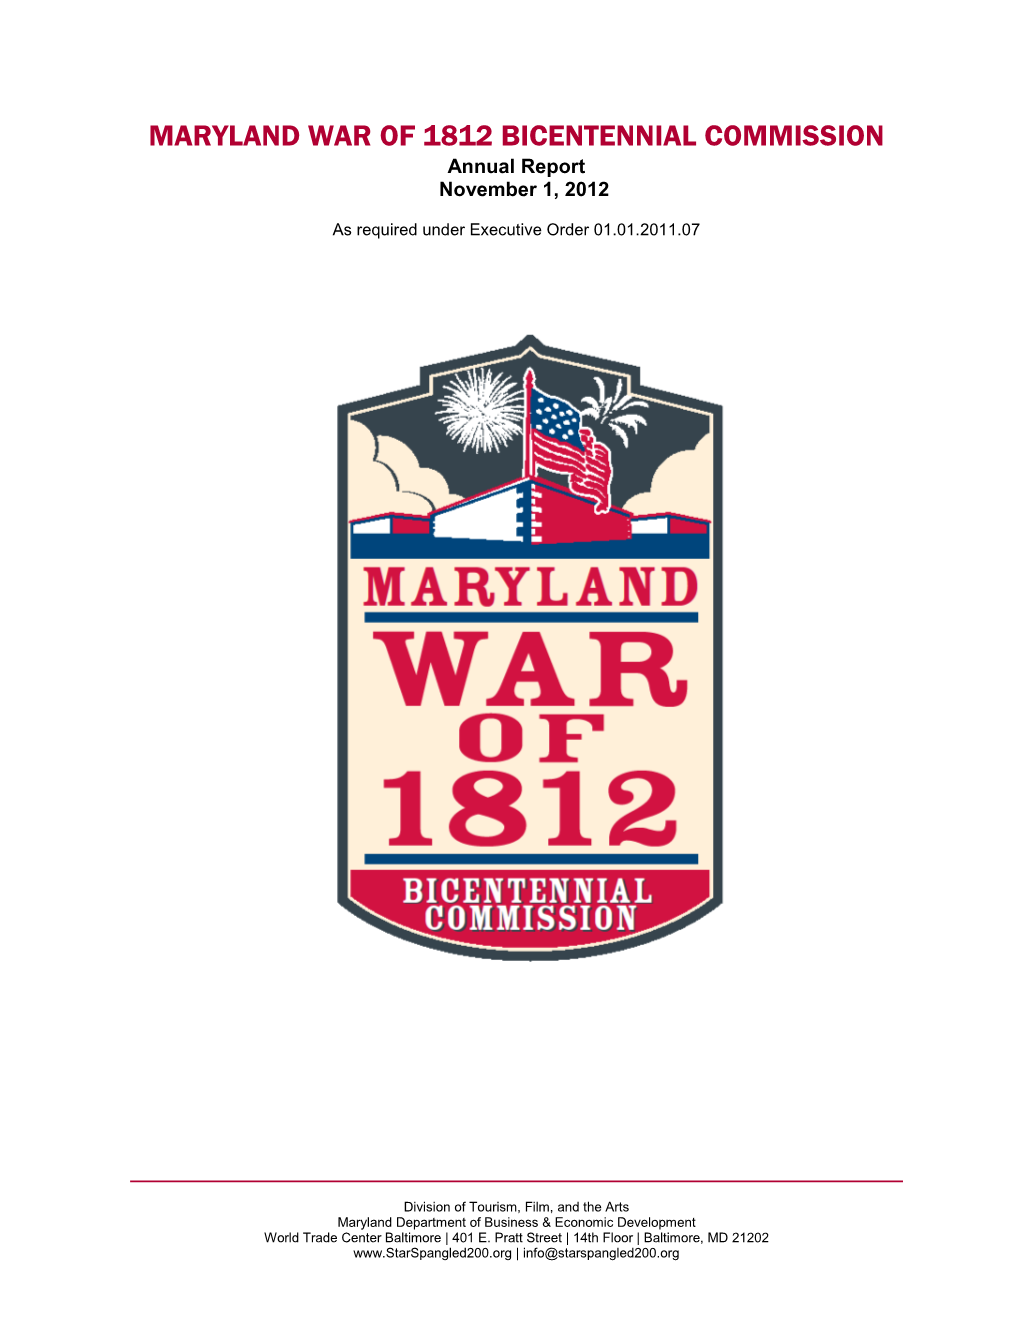 MARYLAND WAR of 1812 BICENTENNIAL COMMISSION Annual Report November 1, 2012